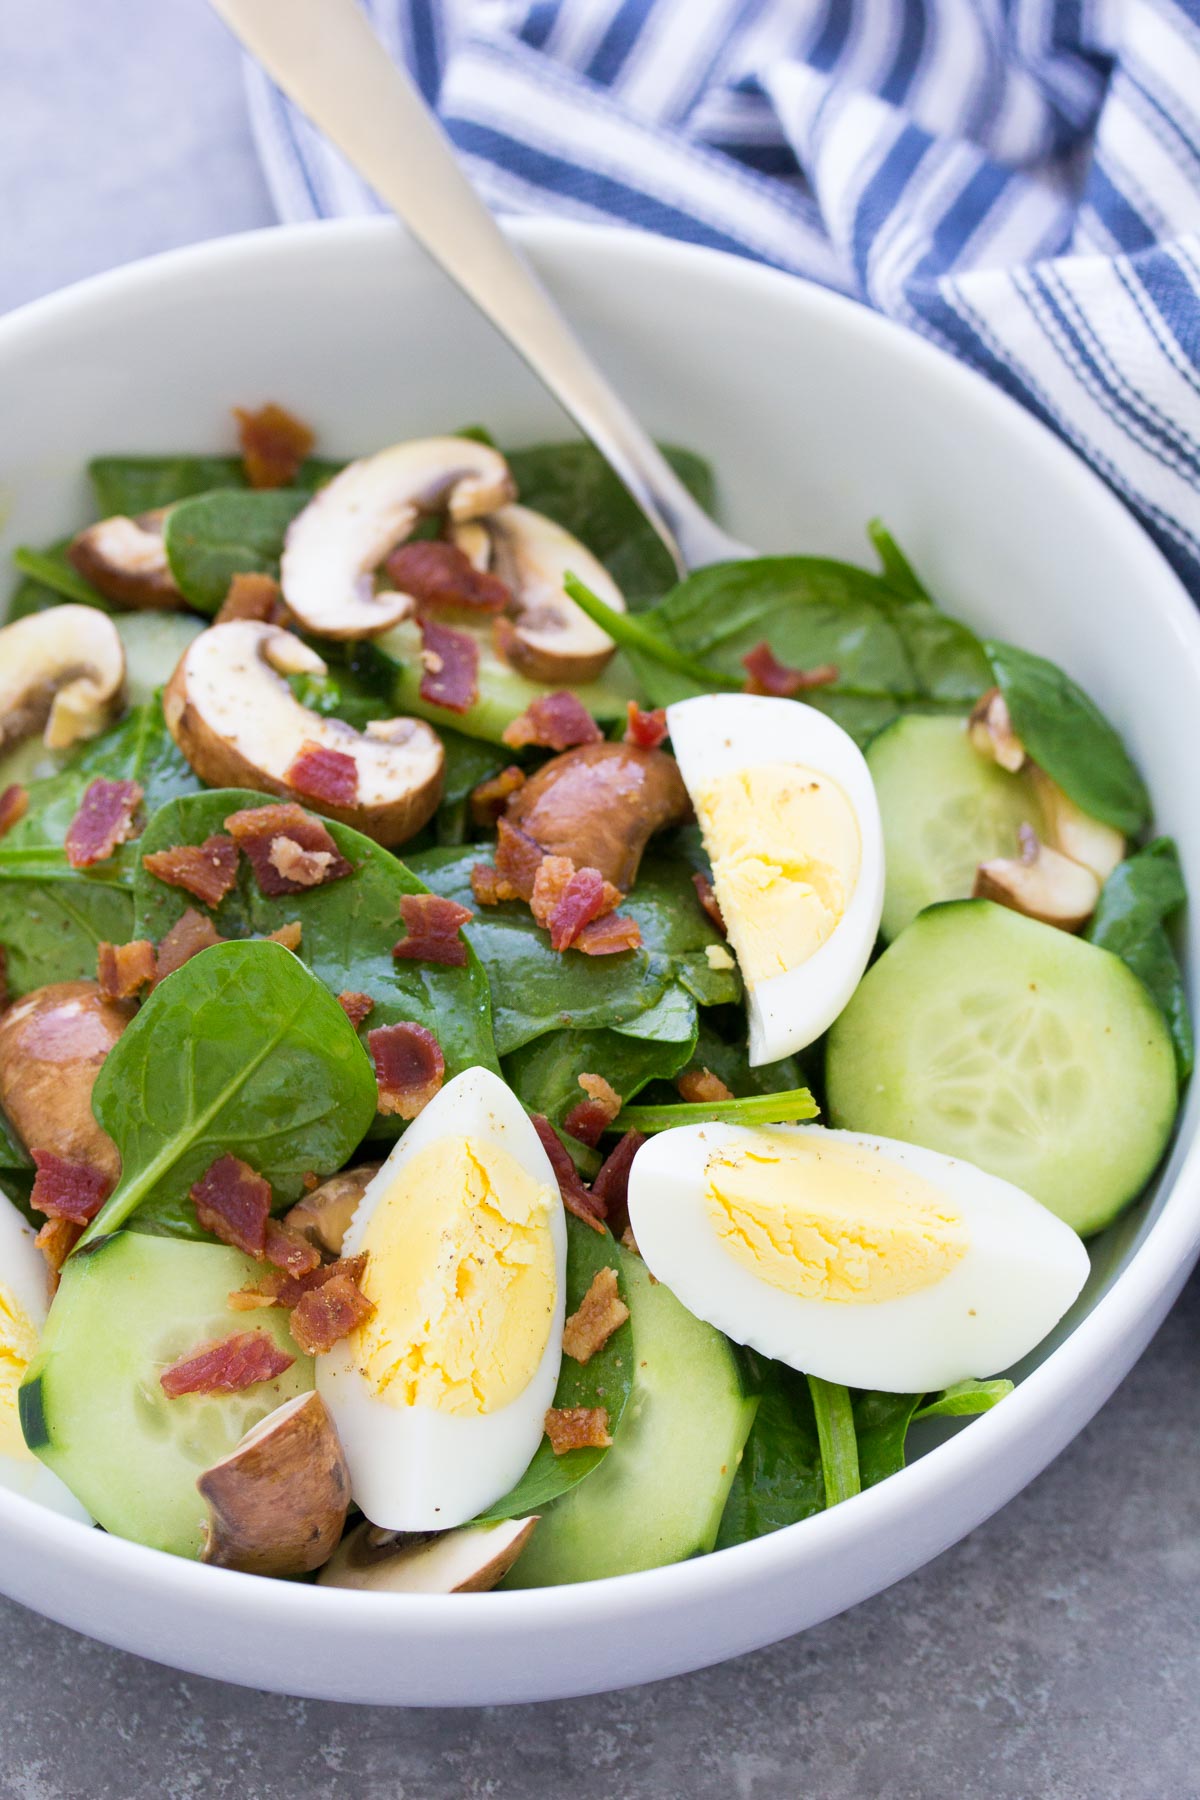 Spinach salad with bacon and hard boiled eggs in white bowl.